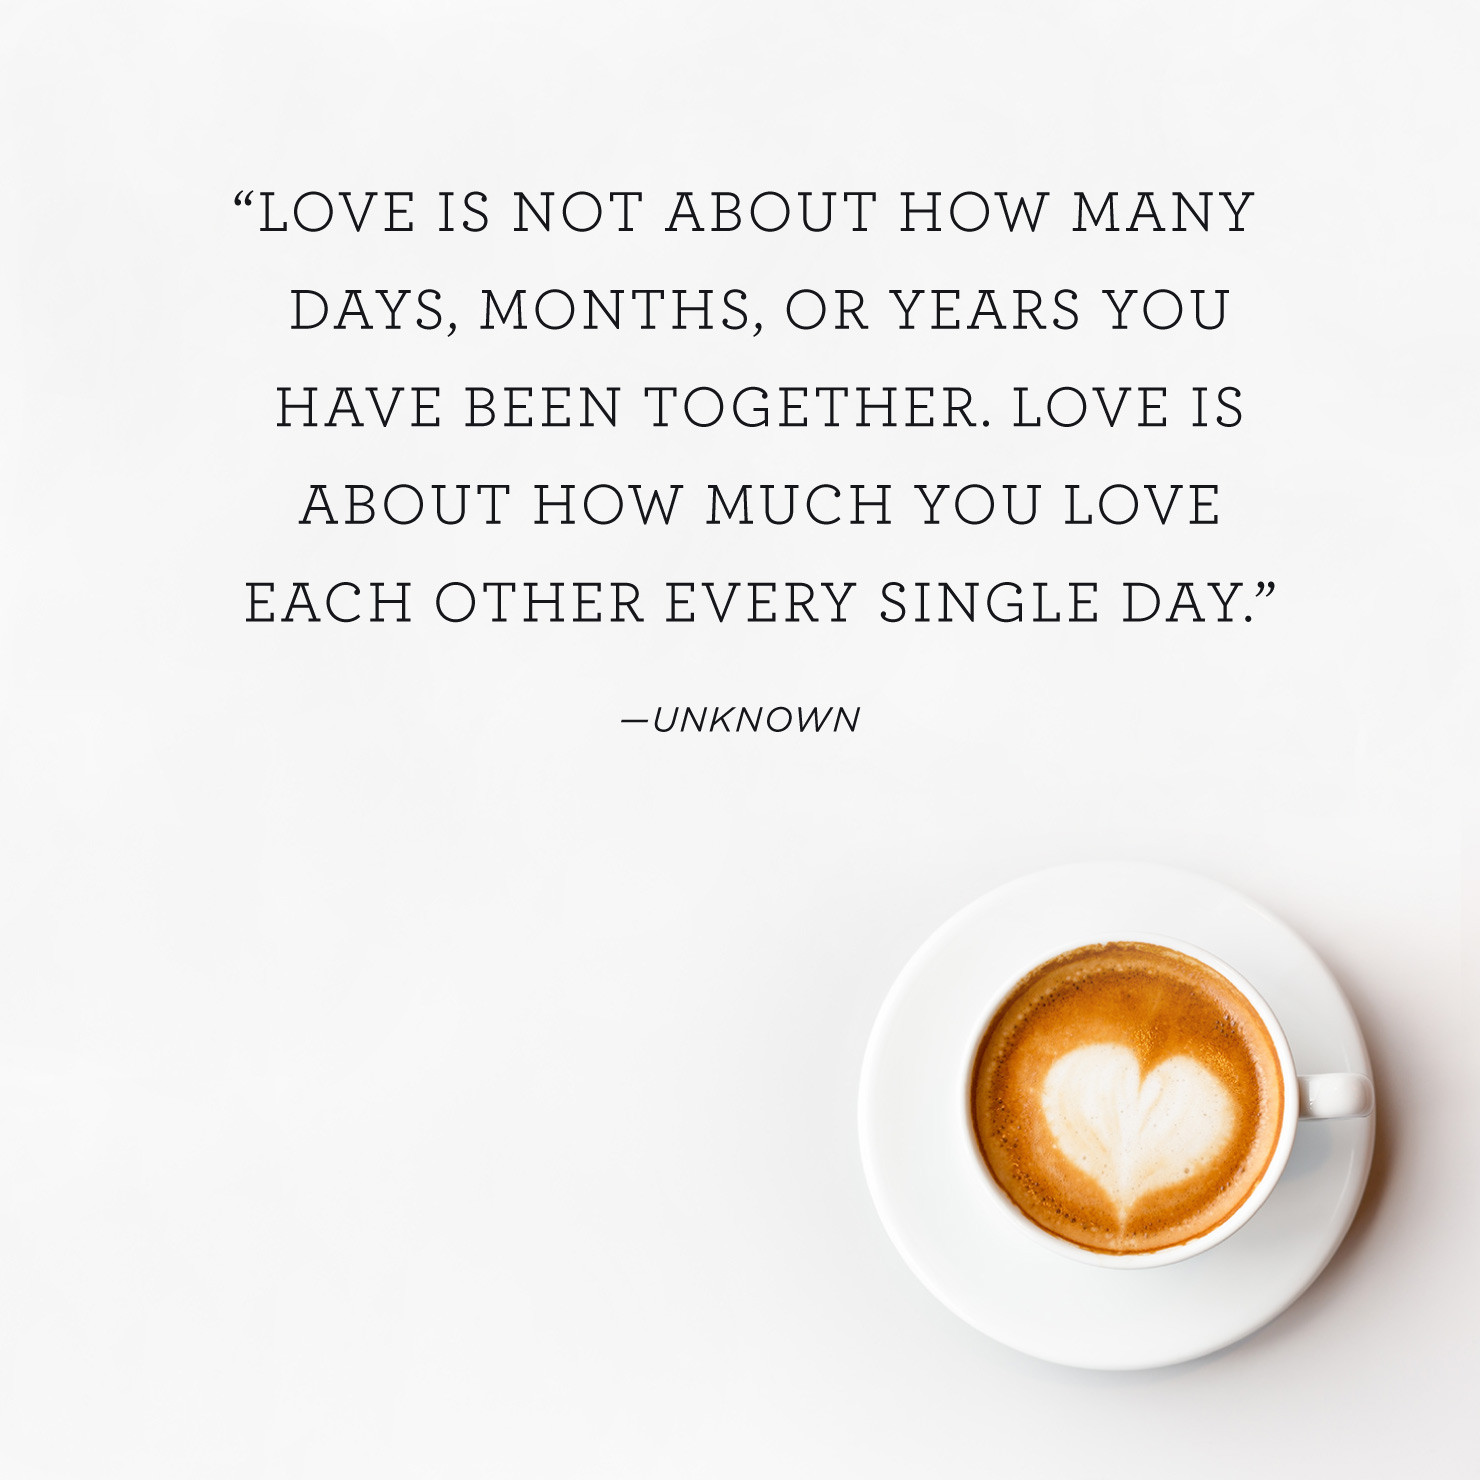 Happy Anniversary Quote
 60 Happy Anniversary Quotes to Celebrate Your Love